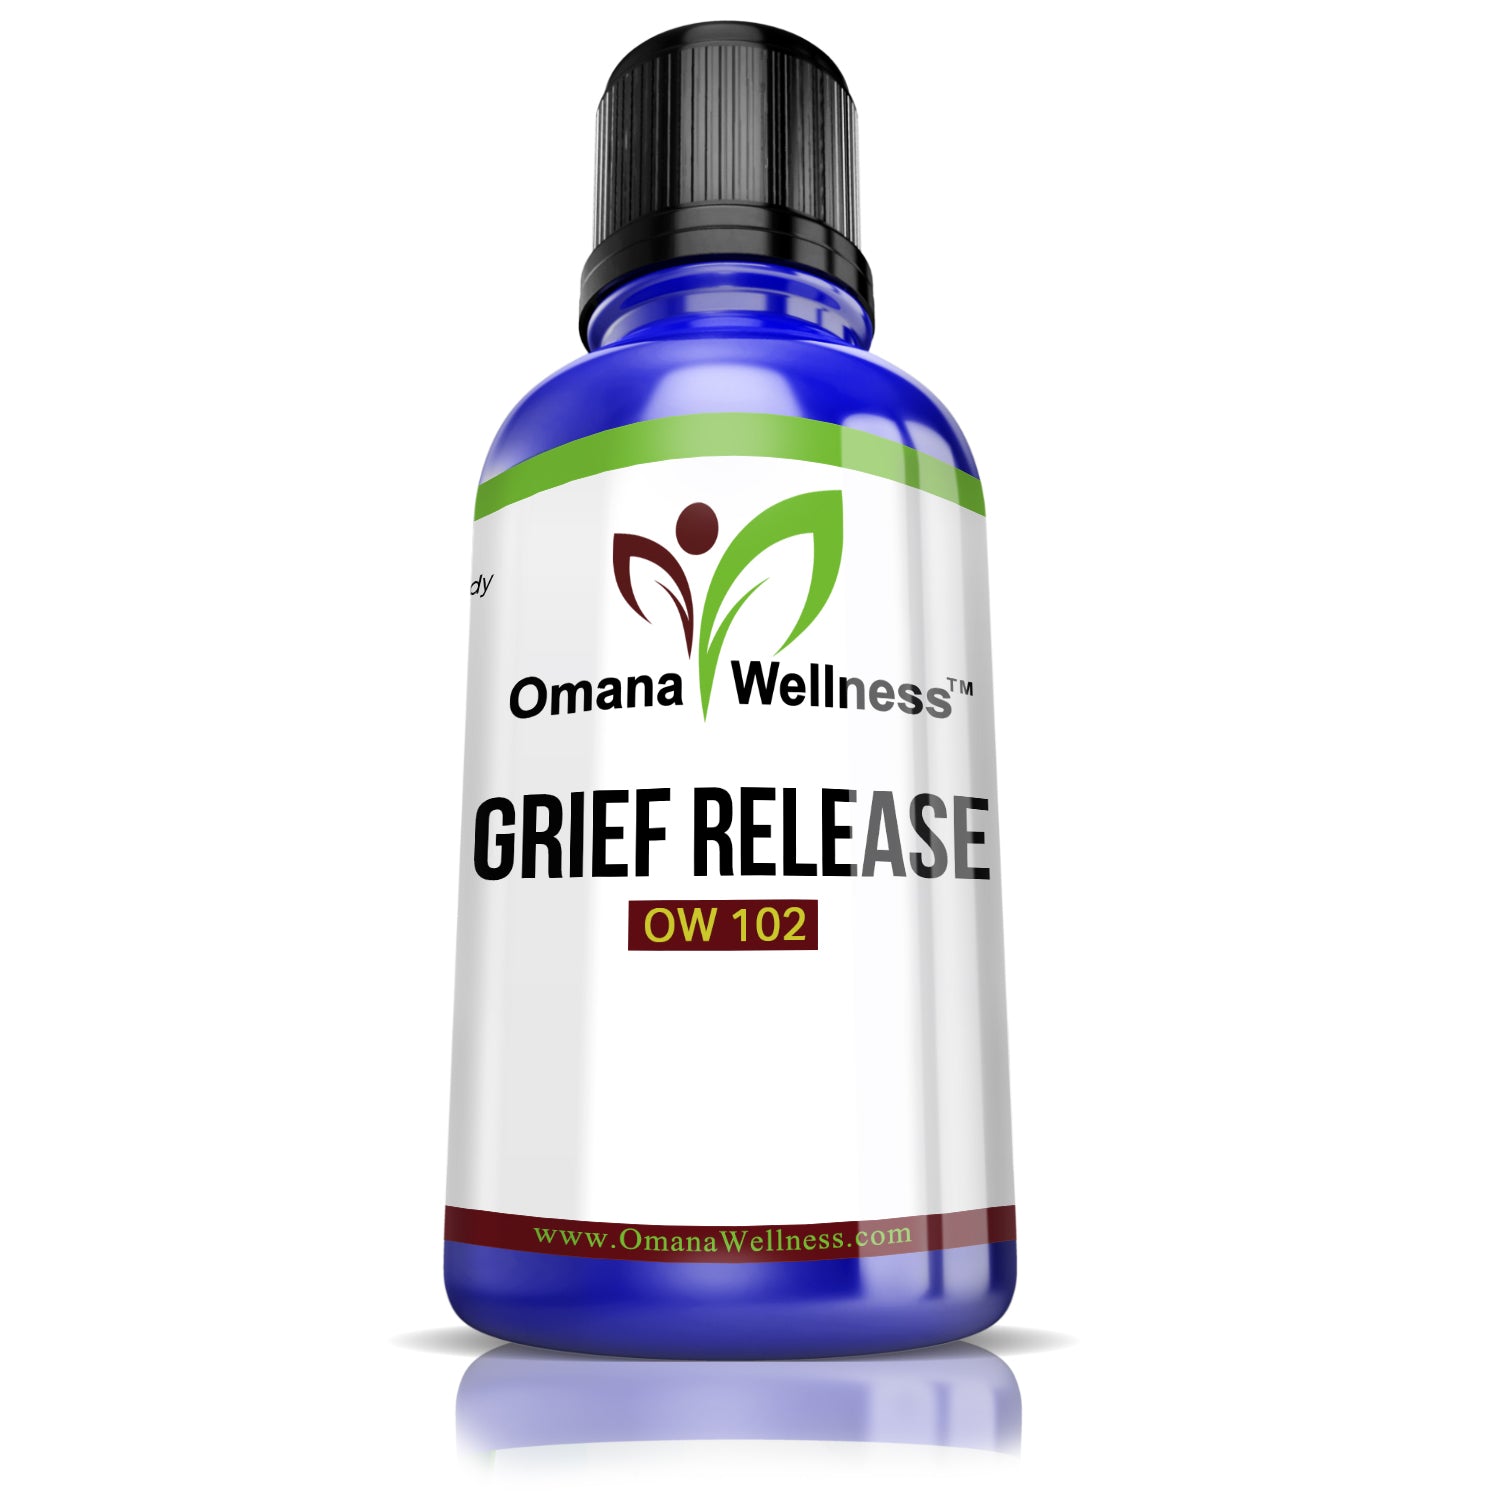 GRIEF RELEASE OW102